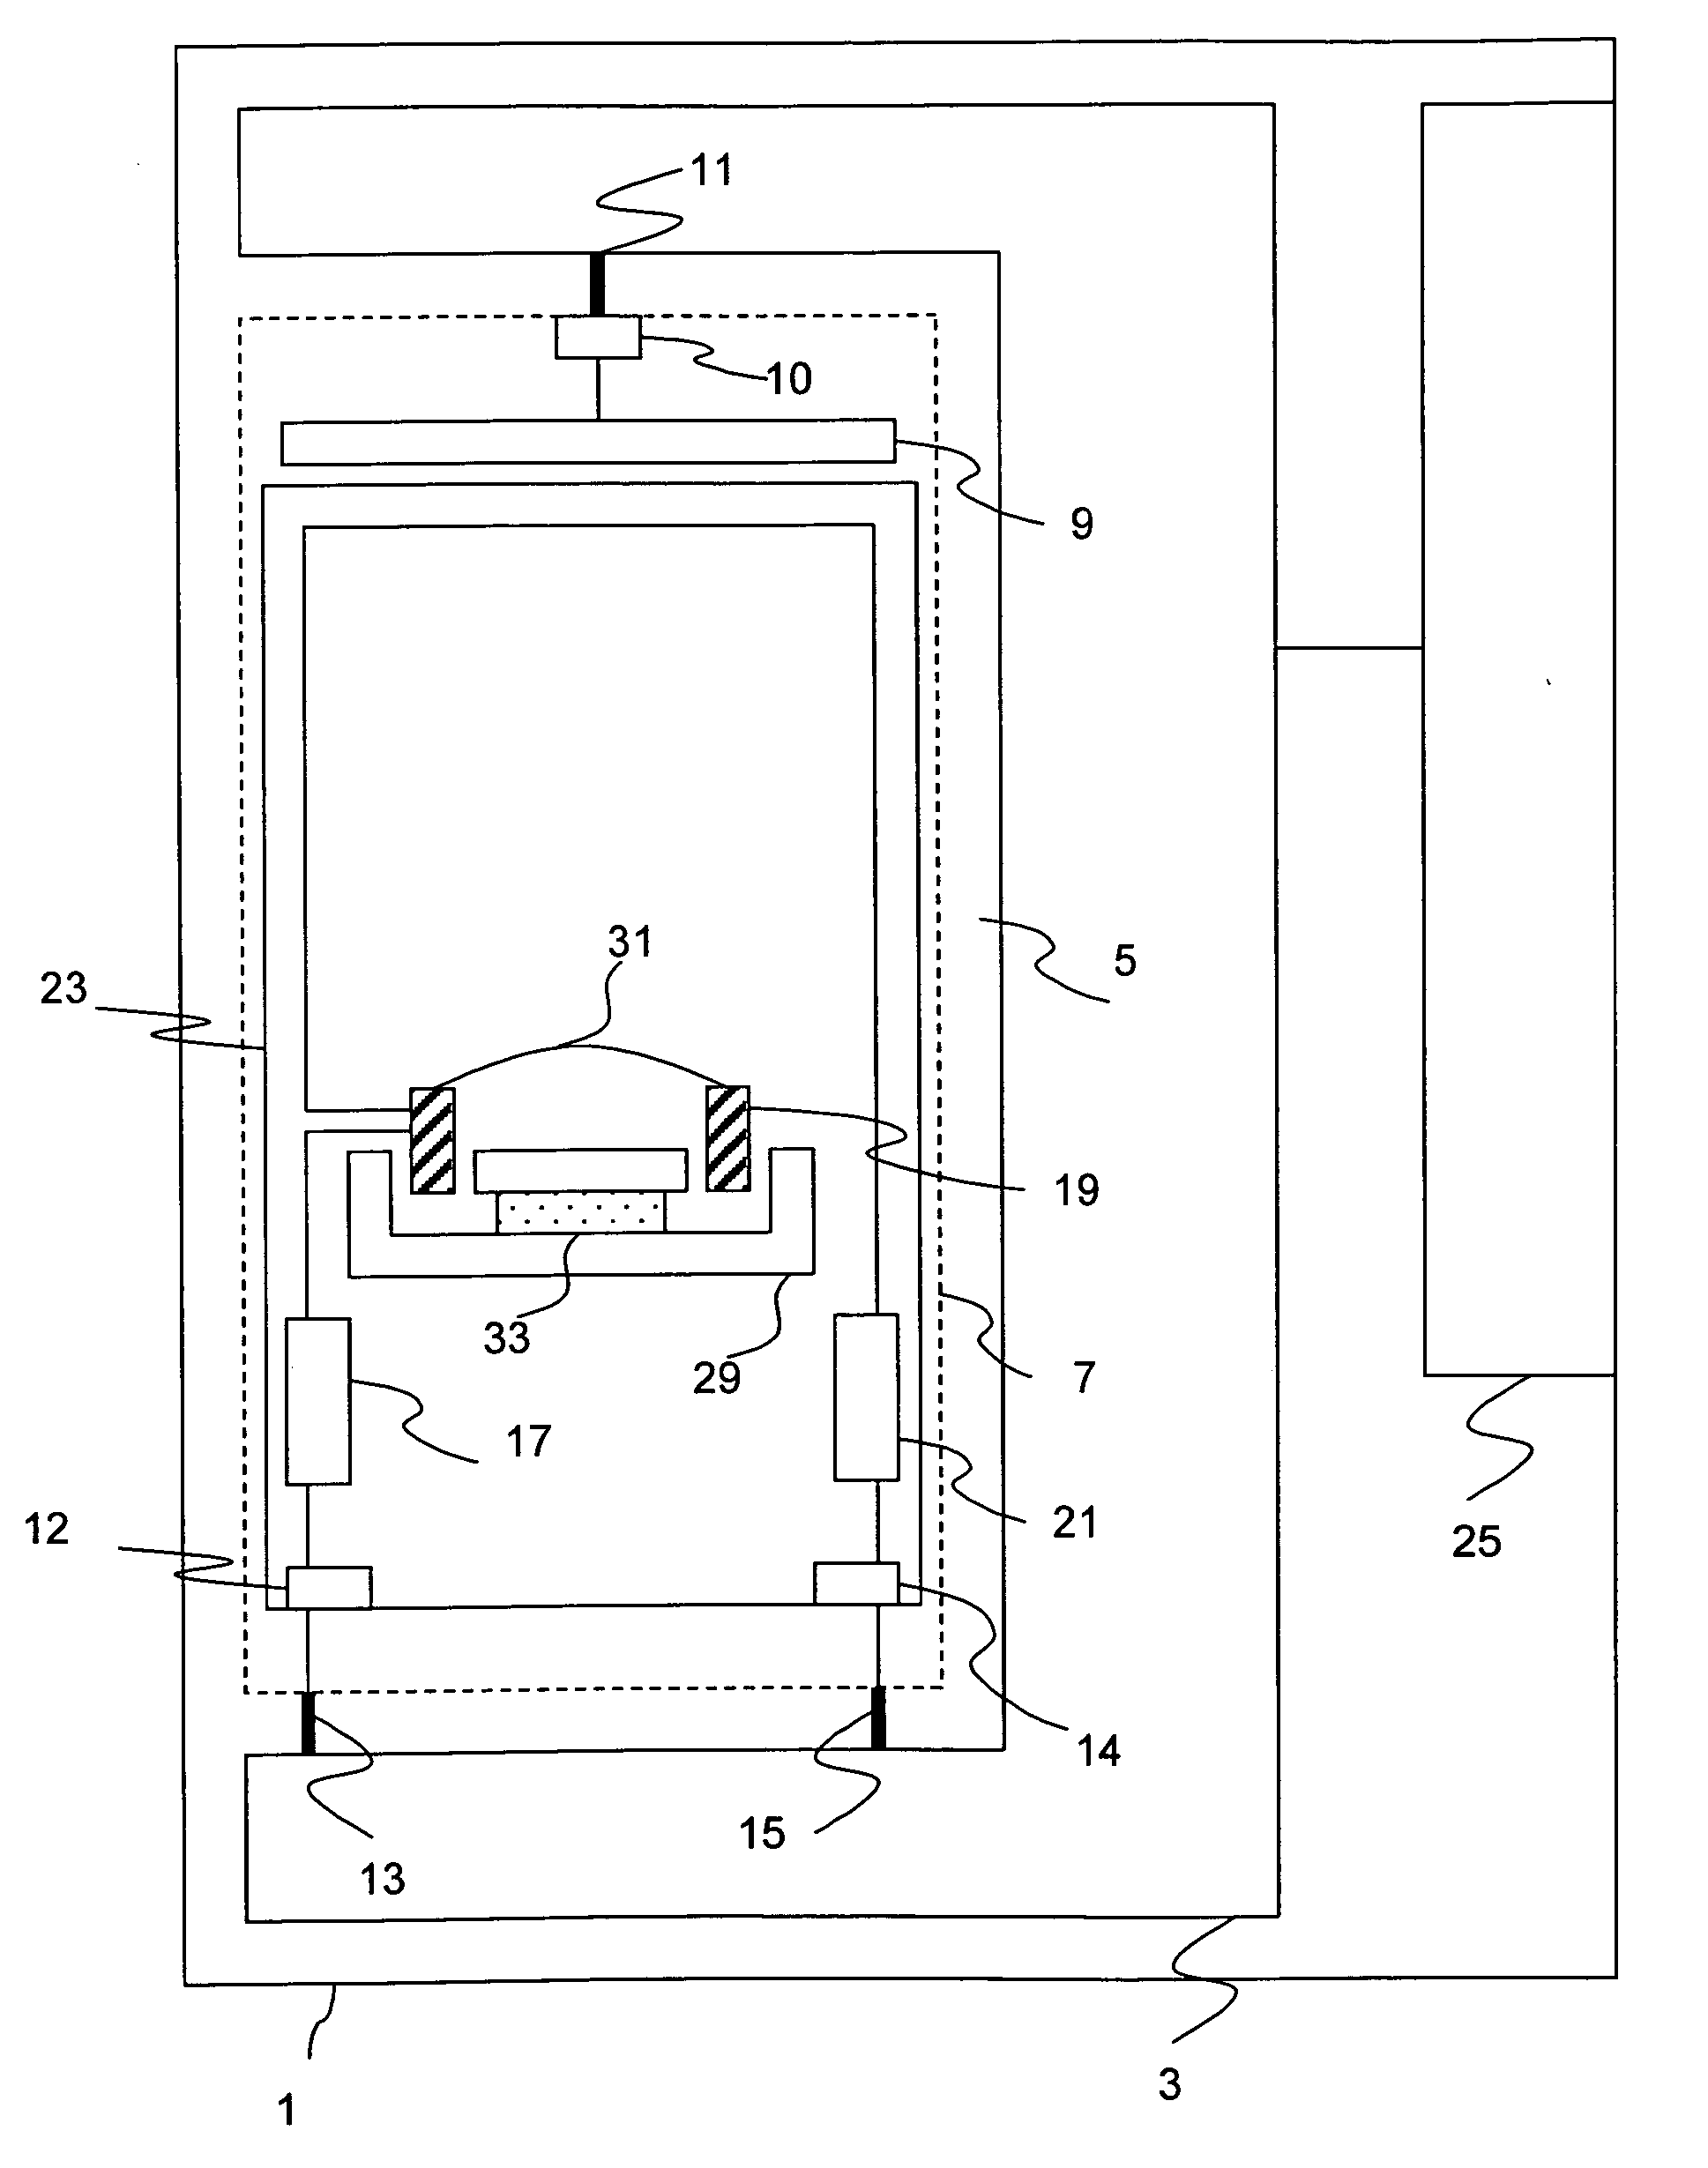 Reduction in interference between components